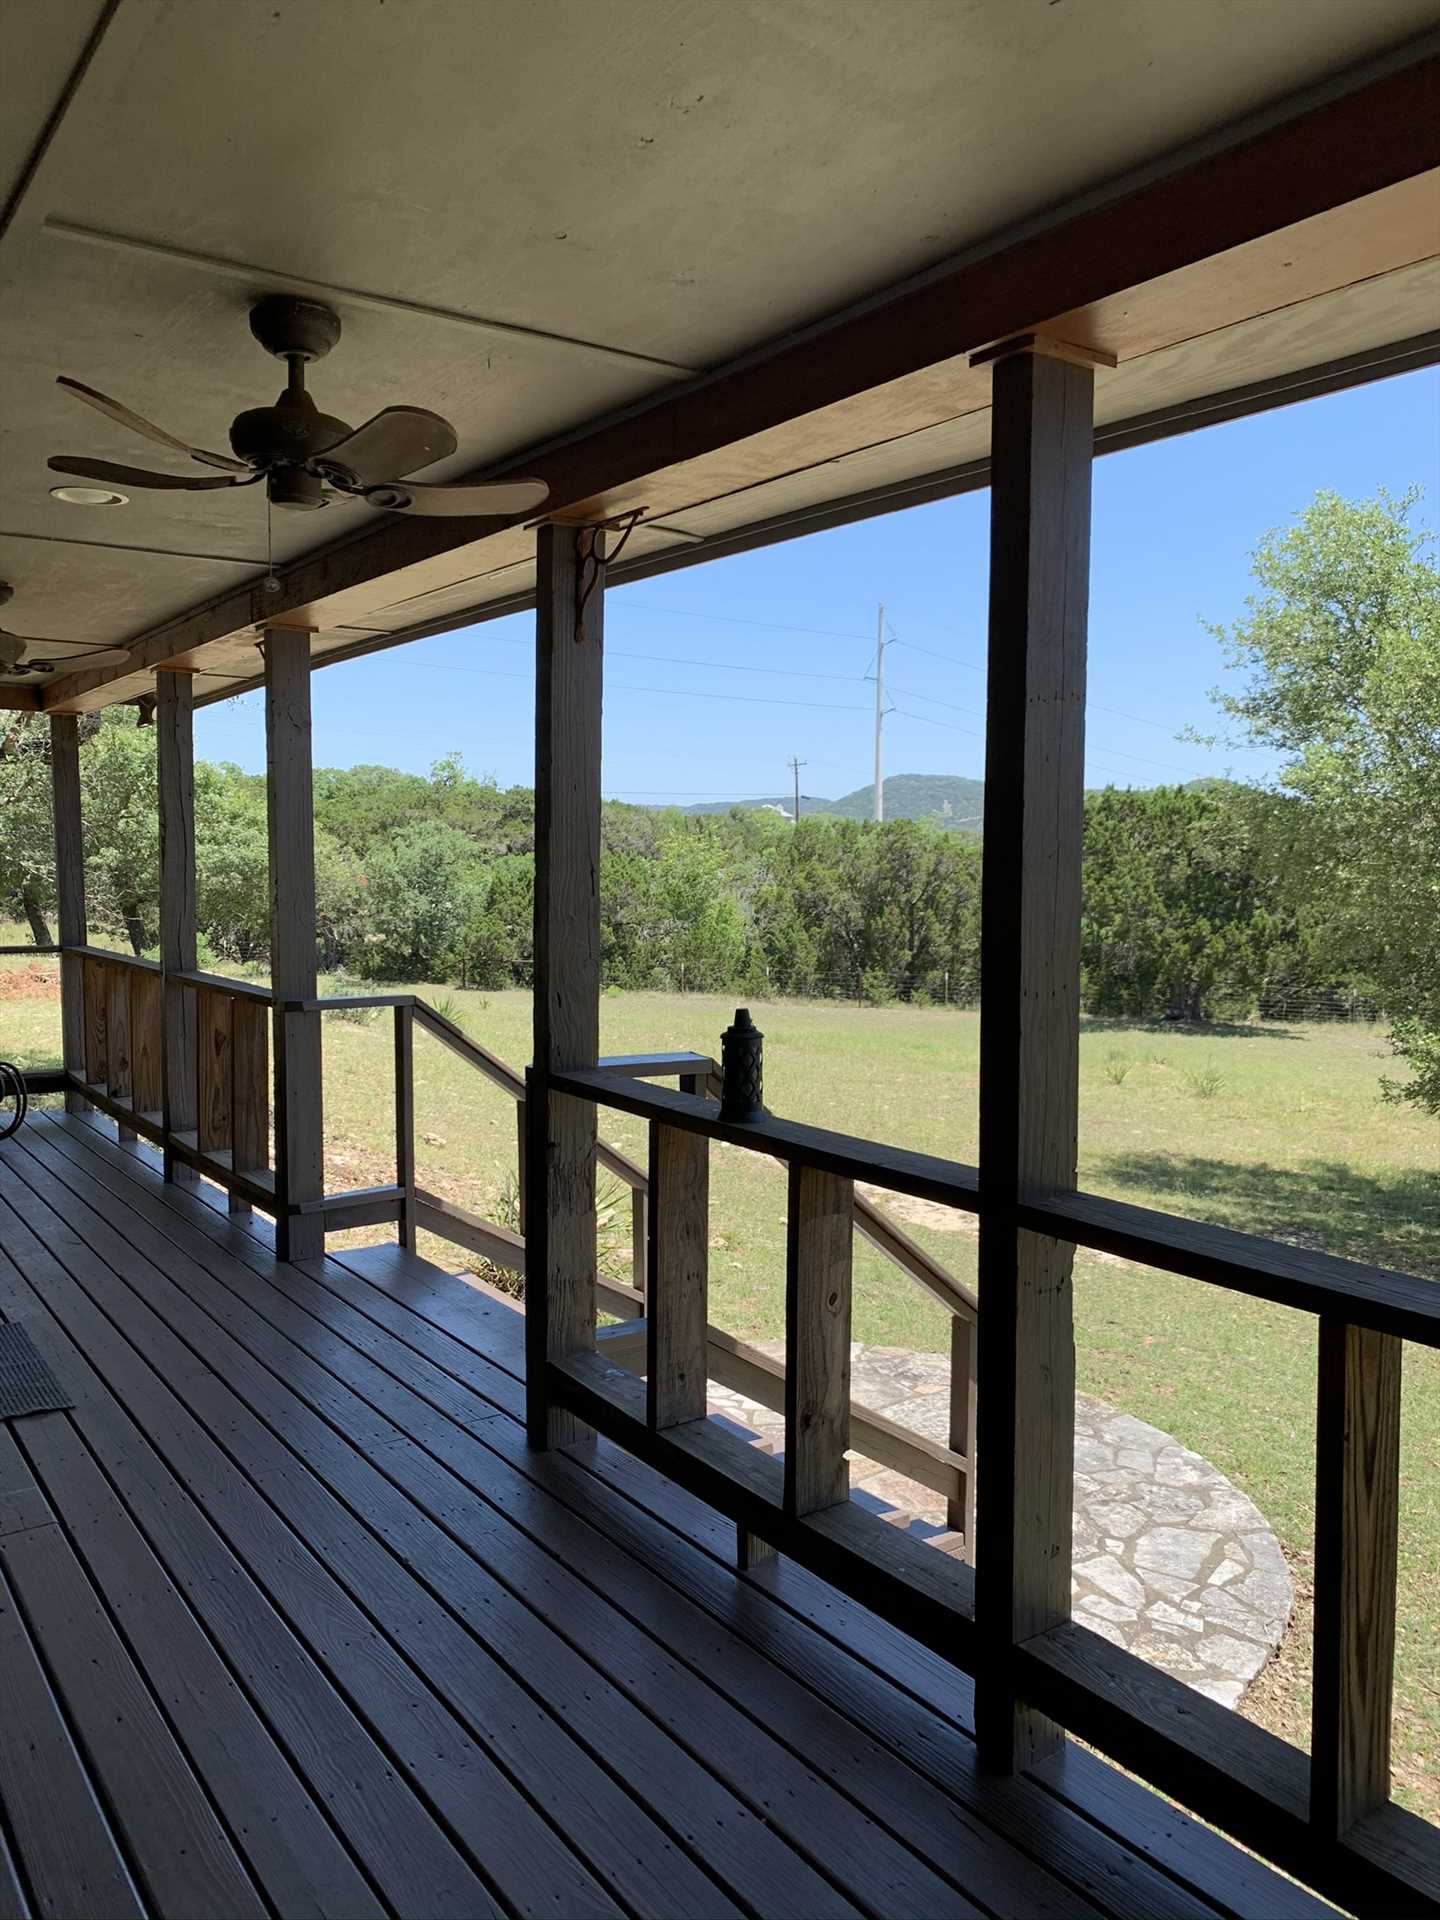                                                 Even on still days, you can stir up a Hill Country breeze on the shaded porch with the help of ceiling fans.